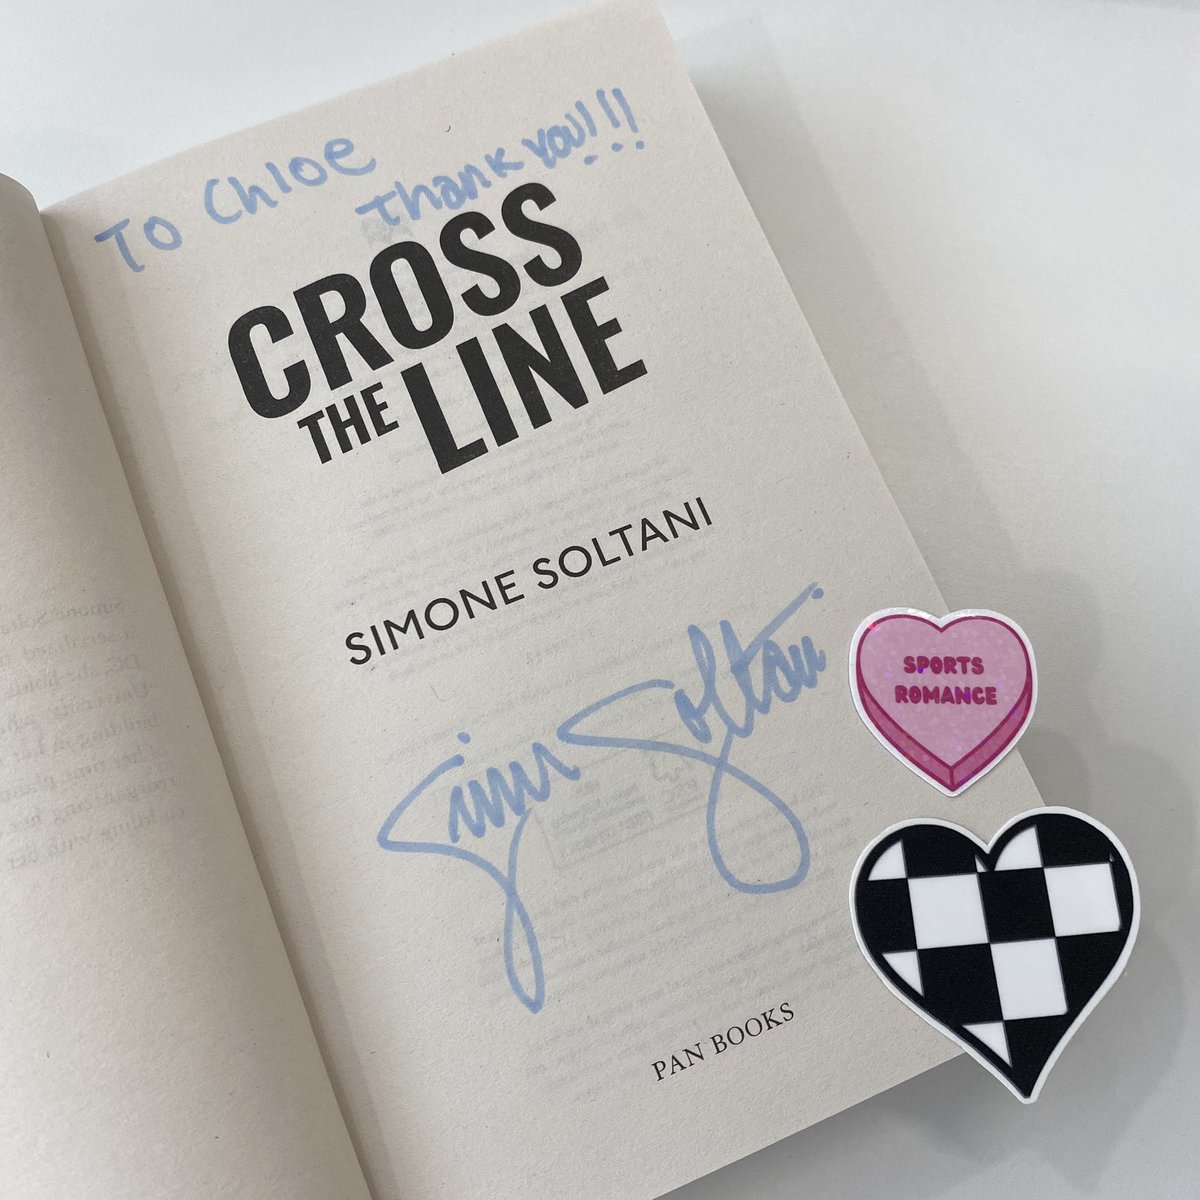 A macaron-sweet celebration at the office today to mark publication of #CrossTheLine by @simonesoltani - complete with toy cars, obligatory macarons, F1 stickers and @lenikauffman’s beautiful illustration of Willow and Dev on cupcakes 🏎️